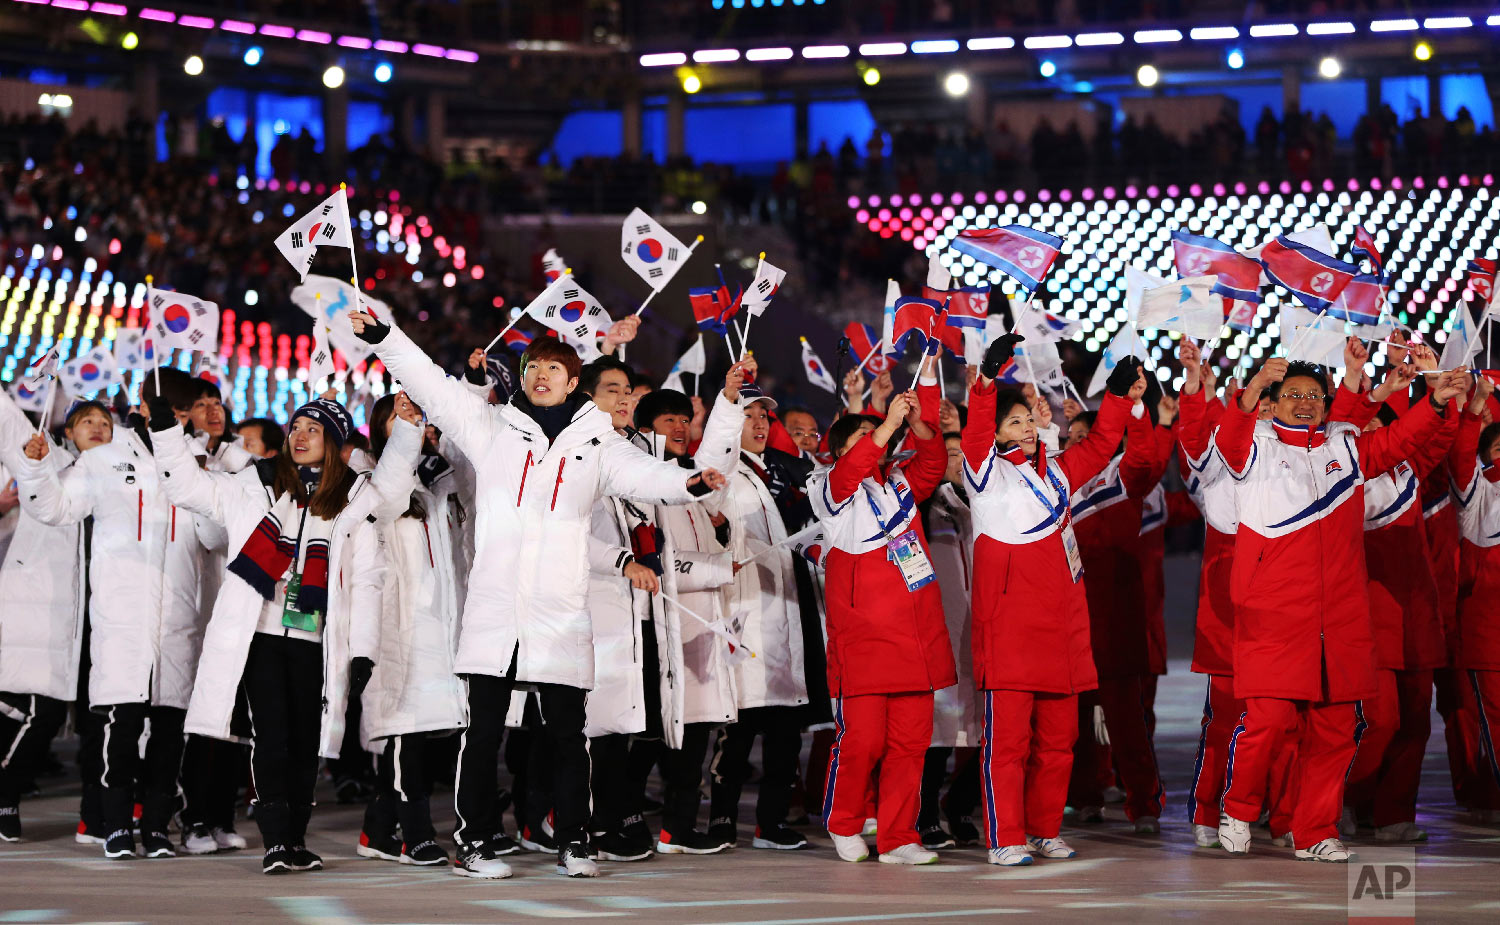  North and South Koreans wave flags together during the closing ceremony of the 2018 Winter Olympics in Pyeongchang, South Korea, on Feb. 25, 2018. (AP Photo/Natacha Pisarenko) 